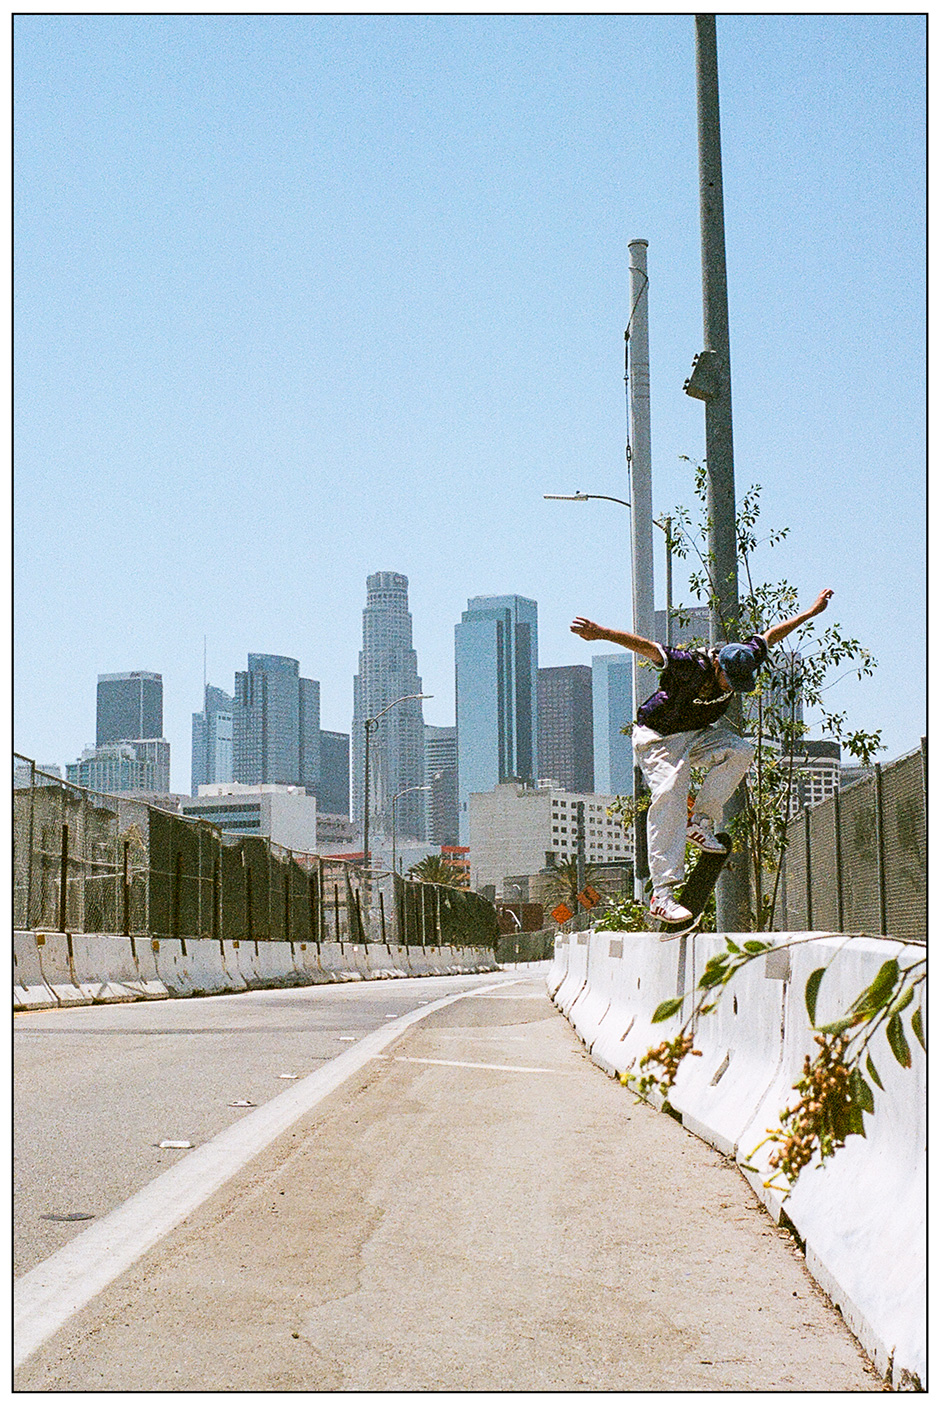 Front nose pop over shot while working on a new part, photo by Nestor Judkins